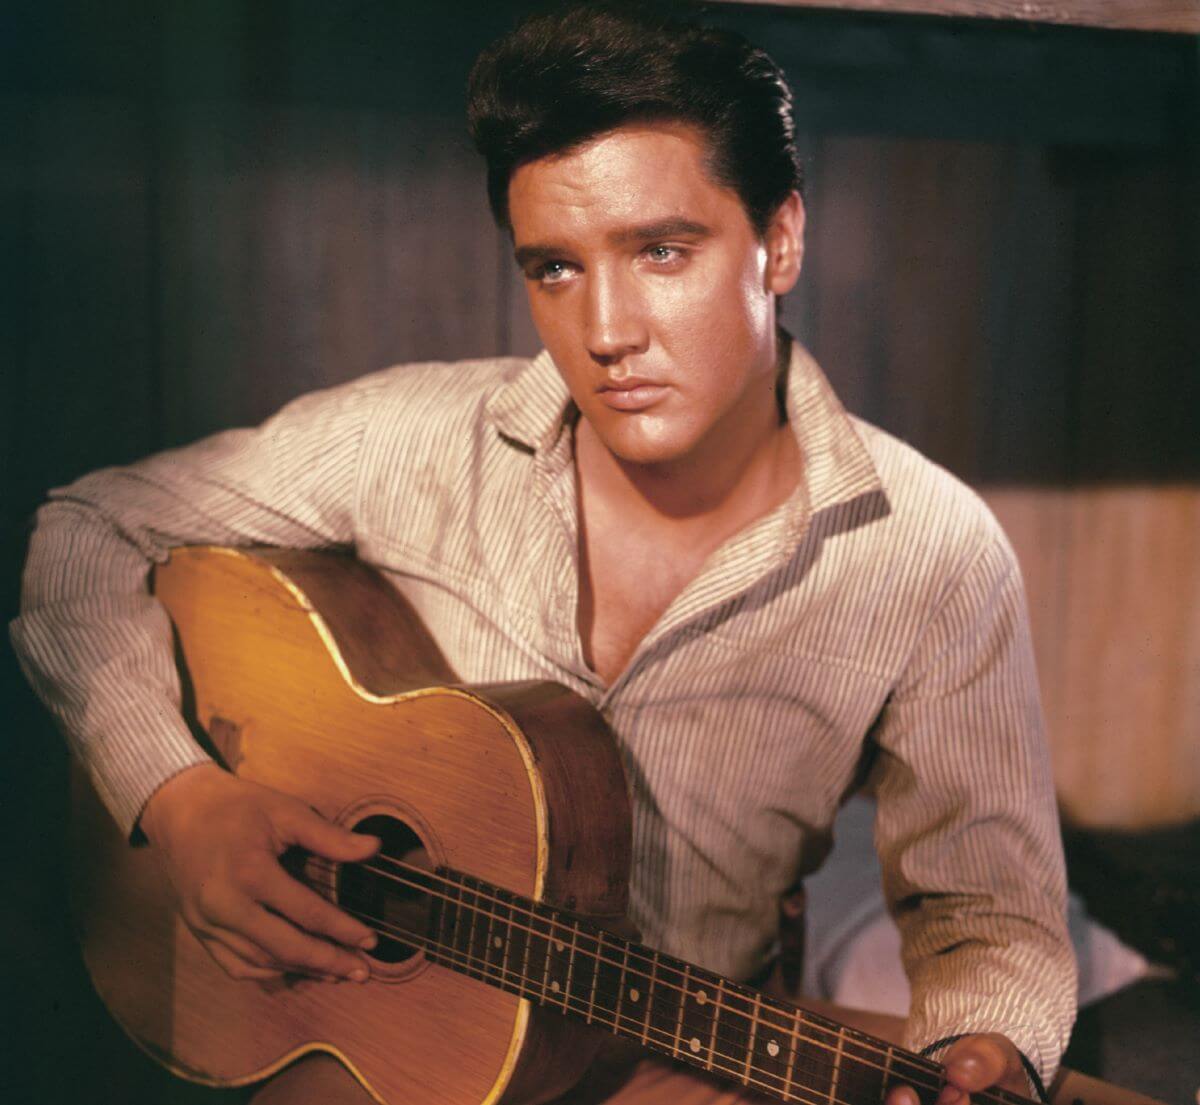 Elvis Presley sits wearing a buttoned shirt and holds an acoustic guitar.